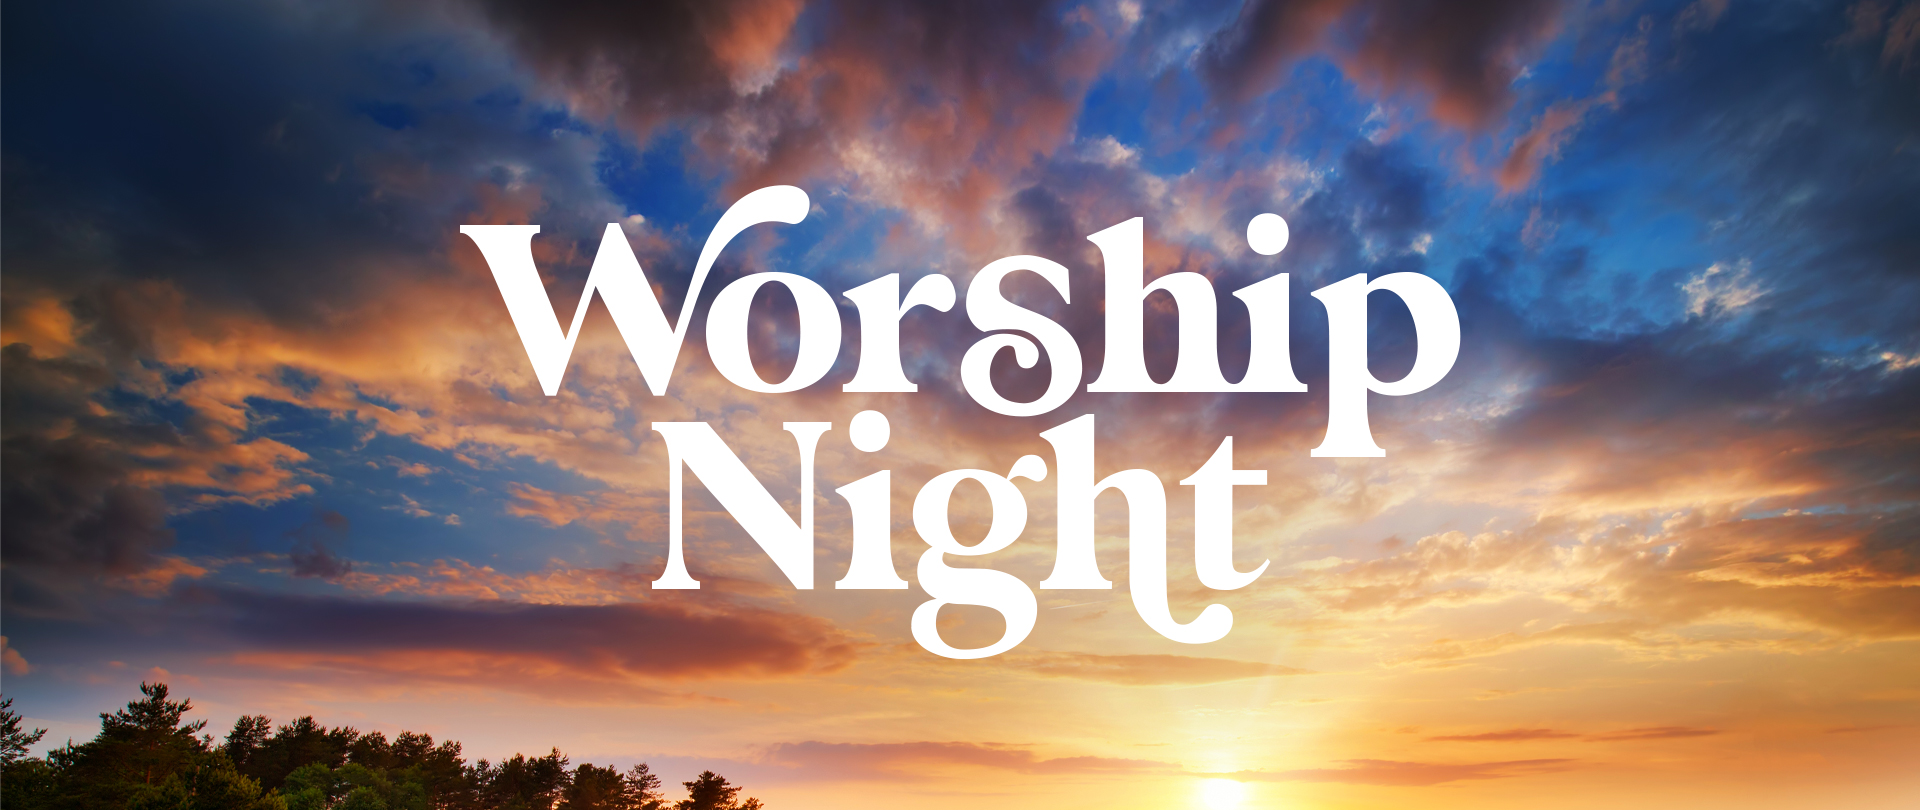 Worship Night
Sunday, May 19, at 6:00 PM
In the Sanctuary
